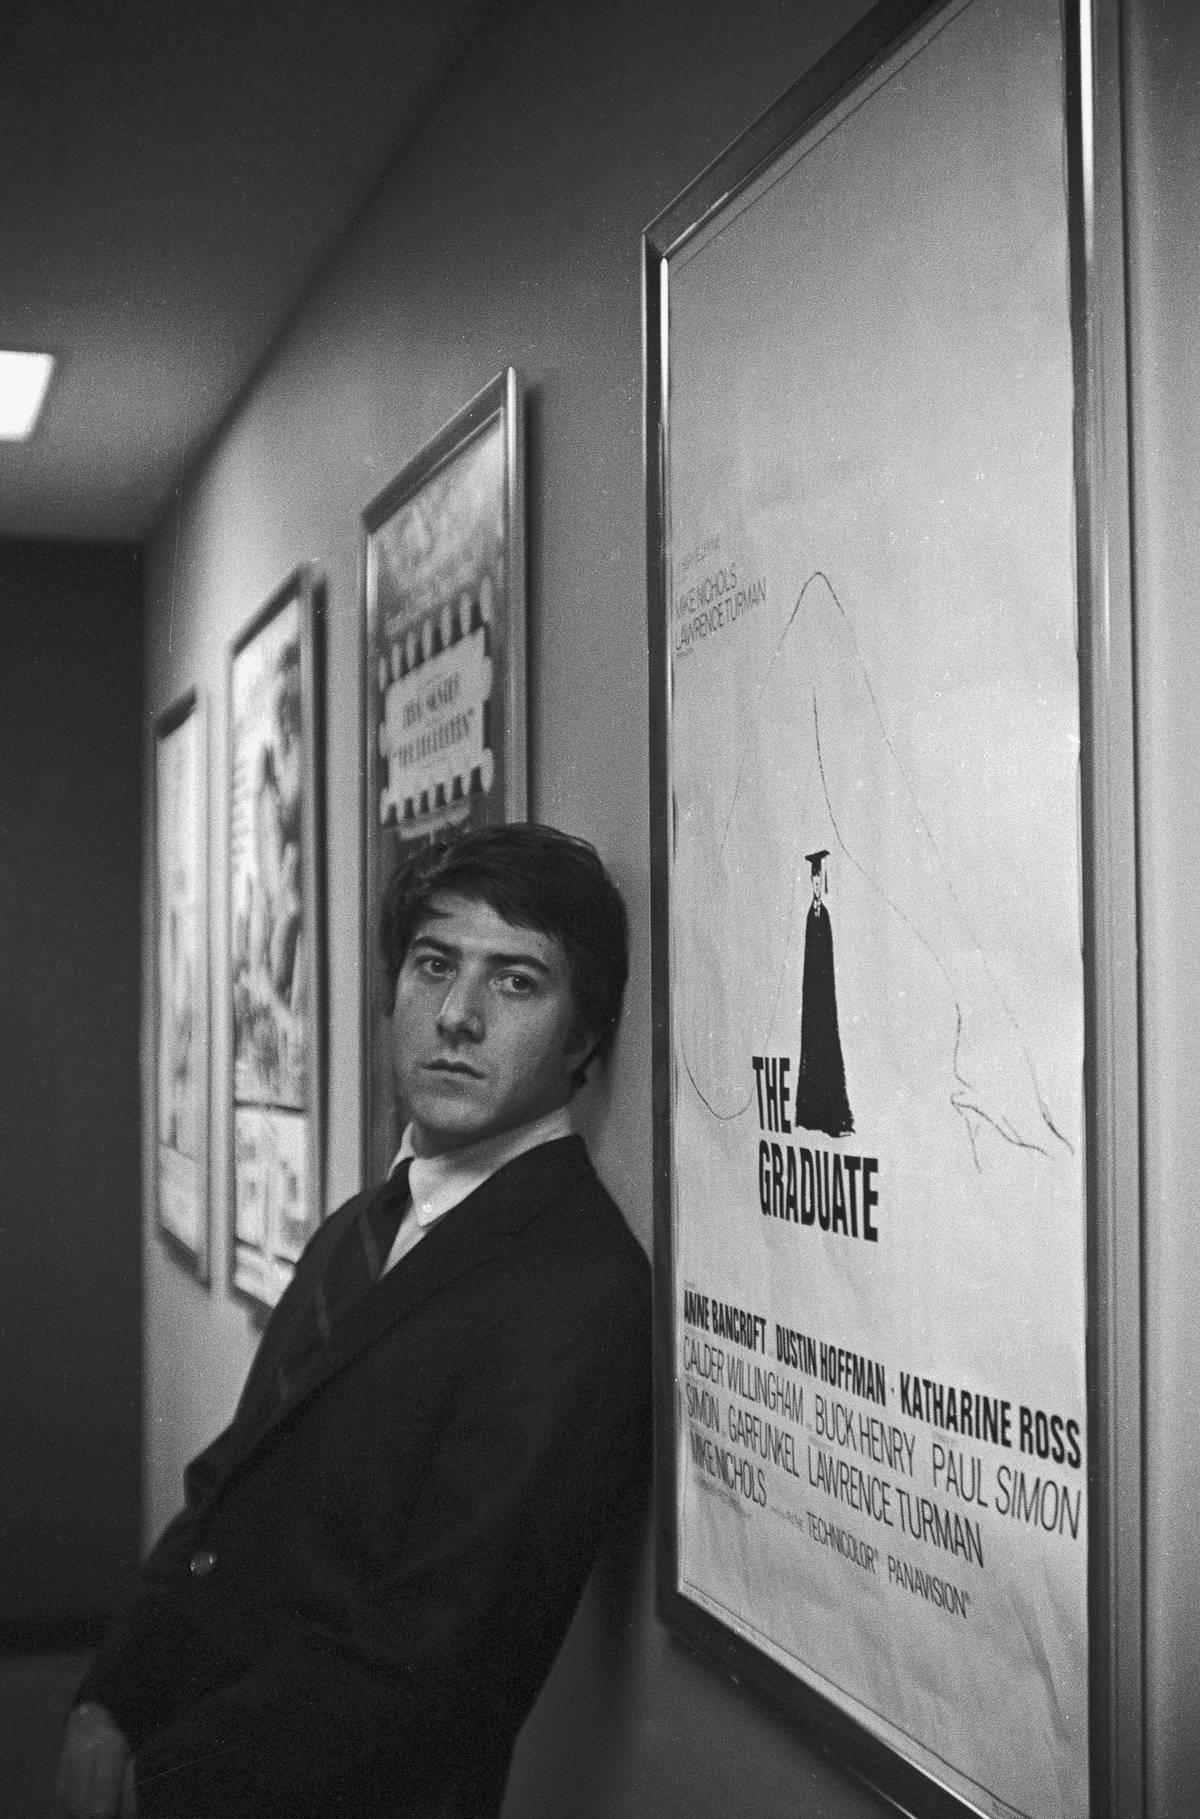 <p>Before Dustin Hoffman was known as a huge name in Hollywood, he was Benjamin Braddock, a college graduate with no real plan for the future. Enter Mrs. Robinson, the older woman who gets on Braddock's radar only for him to fall for her daughter.</p> <p><i>The Graduate </i>went on to be the highest-grossing film worldwide when it was released in 1967. Little did Hoffman know while he was standing next to the theater poster that he was about to become a huge star.</p>